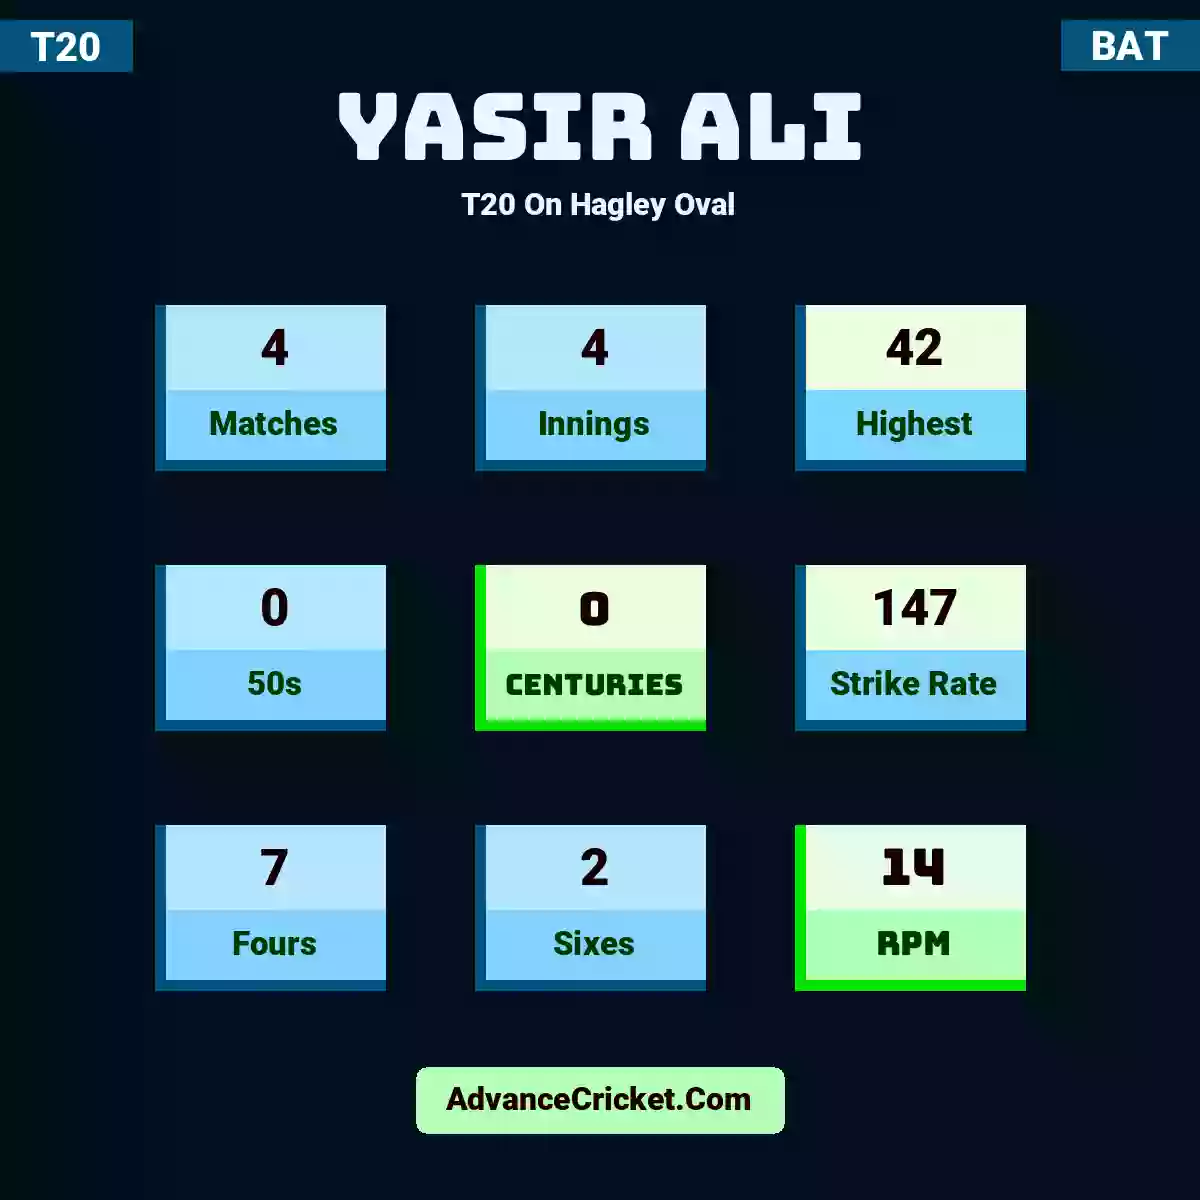 Yasir Ali T20  On Hagley Oval, Yasir Ali played 4 matches, scored 42 runs as highest, 0 half-centuries, and 0 centuries, with a strike rate of 147. Y.Ali hit 7 fours and 2 sixes, with an RPM of 14.